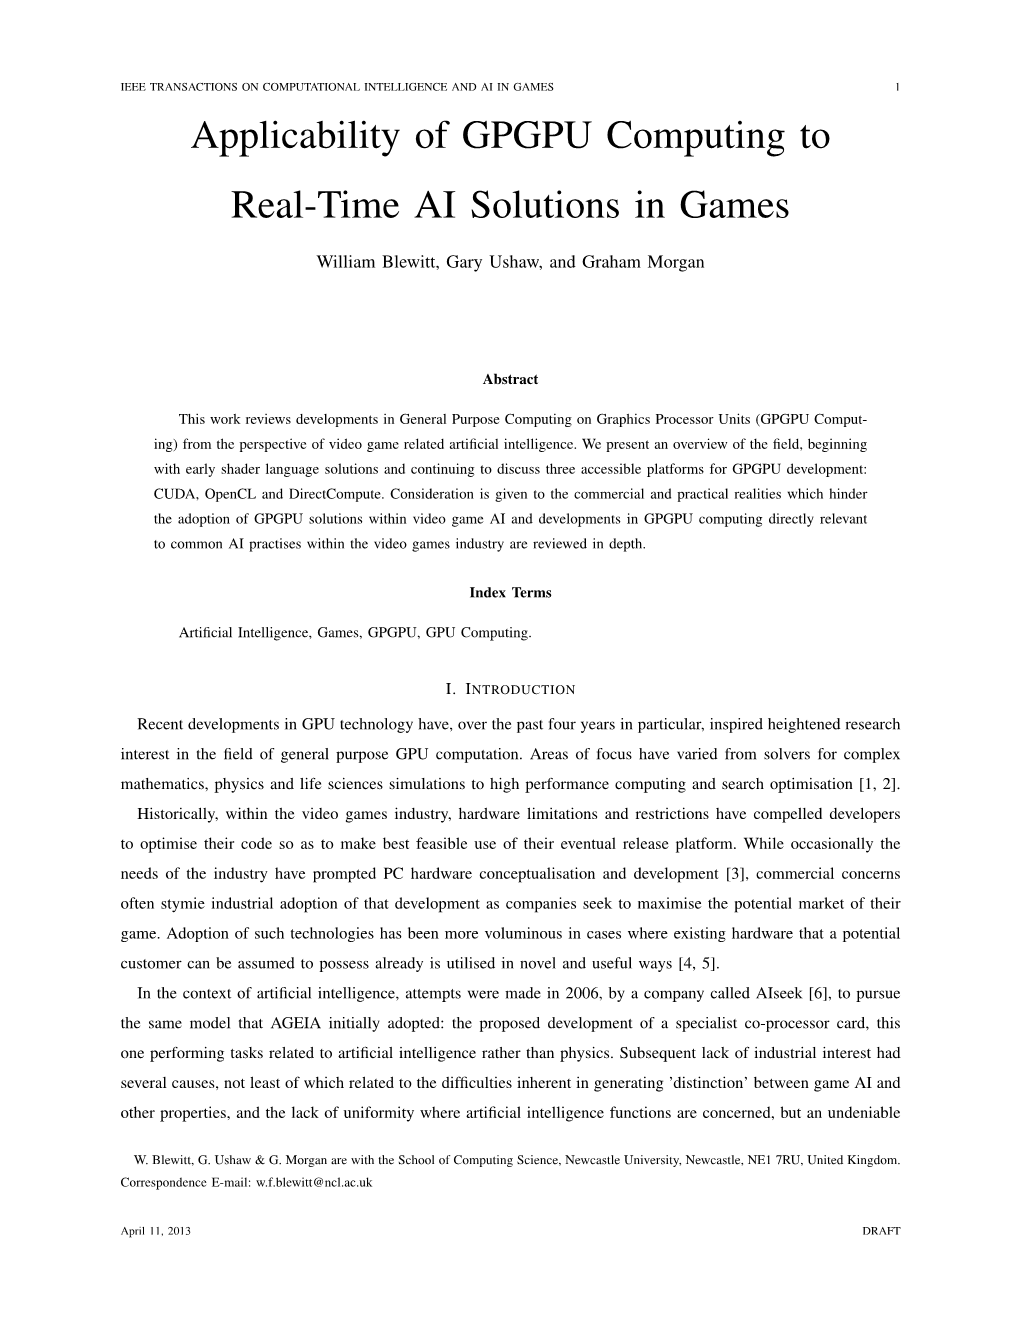 Applicability of GPGPU Computing to Real-Time AI Solutions in Games